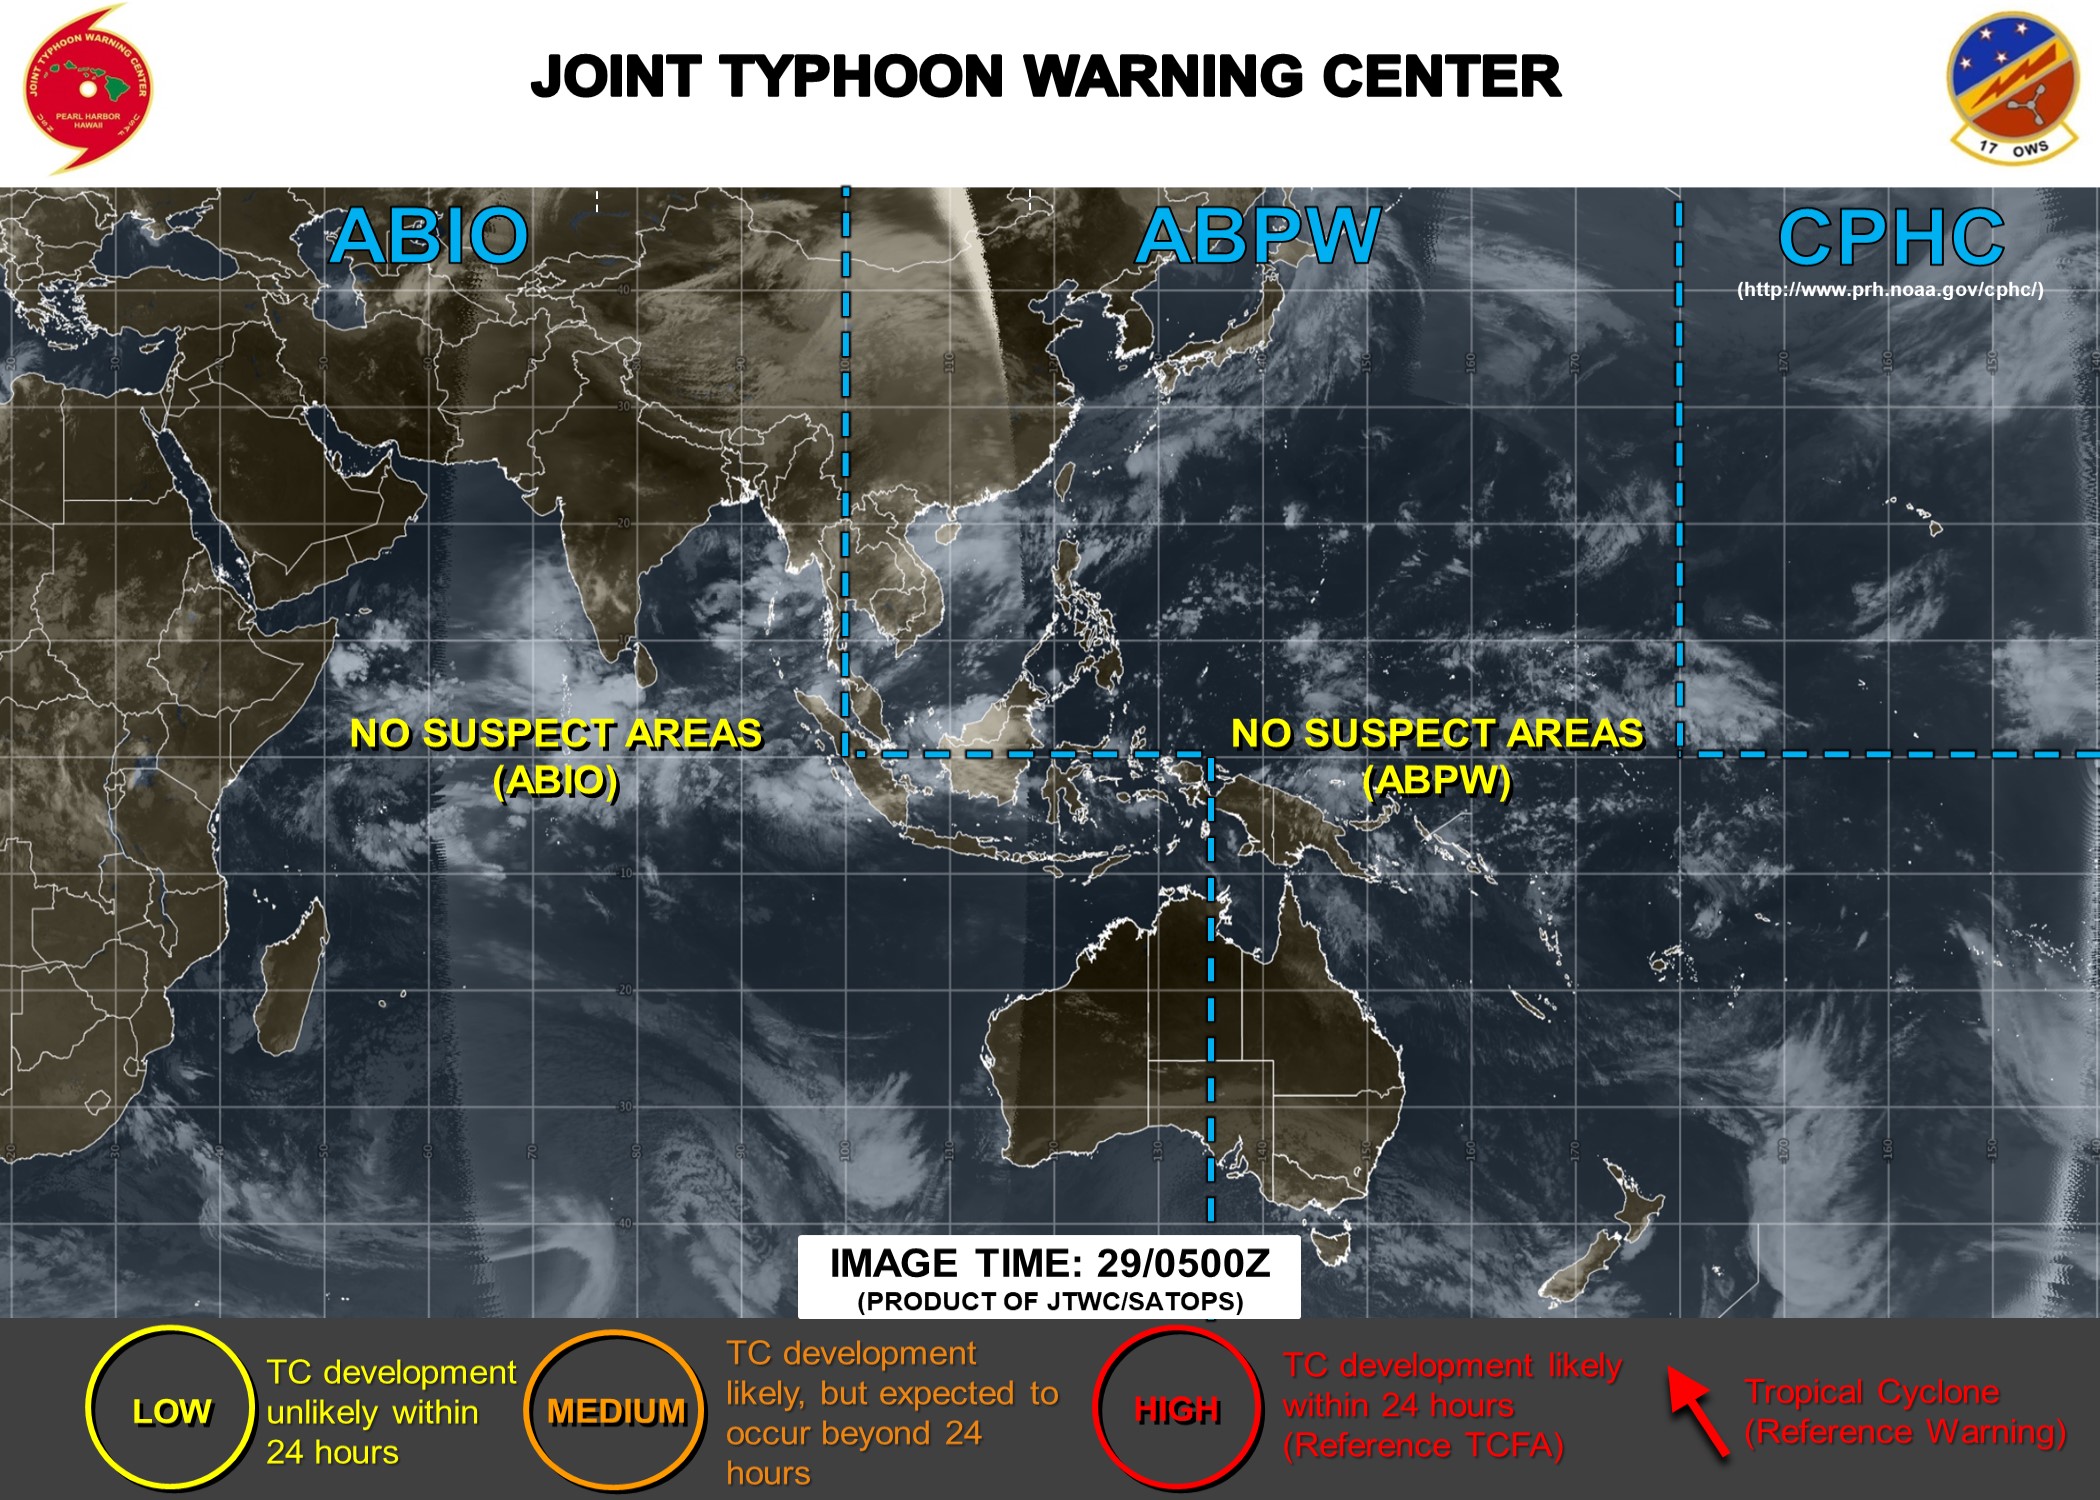 Tropical cyclones: still calm, INVEST 91E not doing a great deal over the Eastern North Pacific at the moment